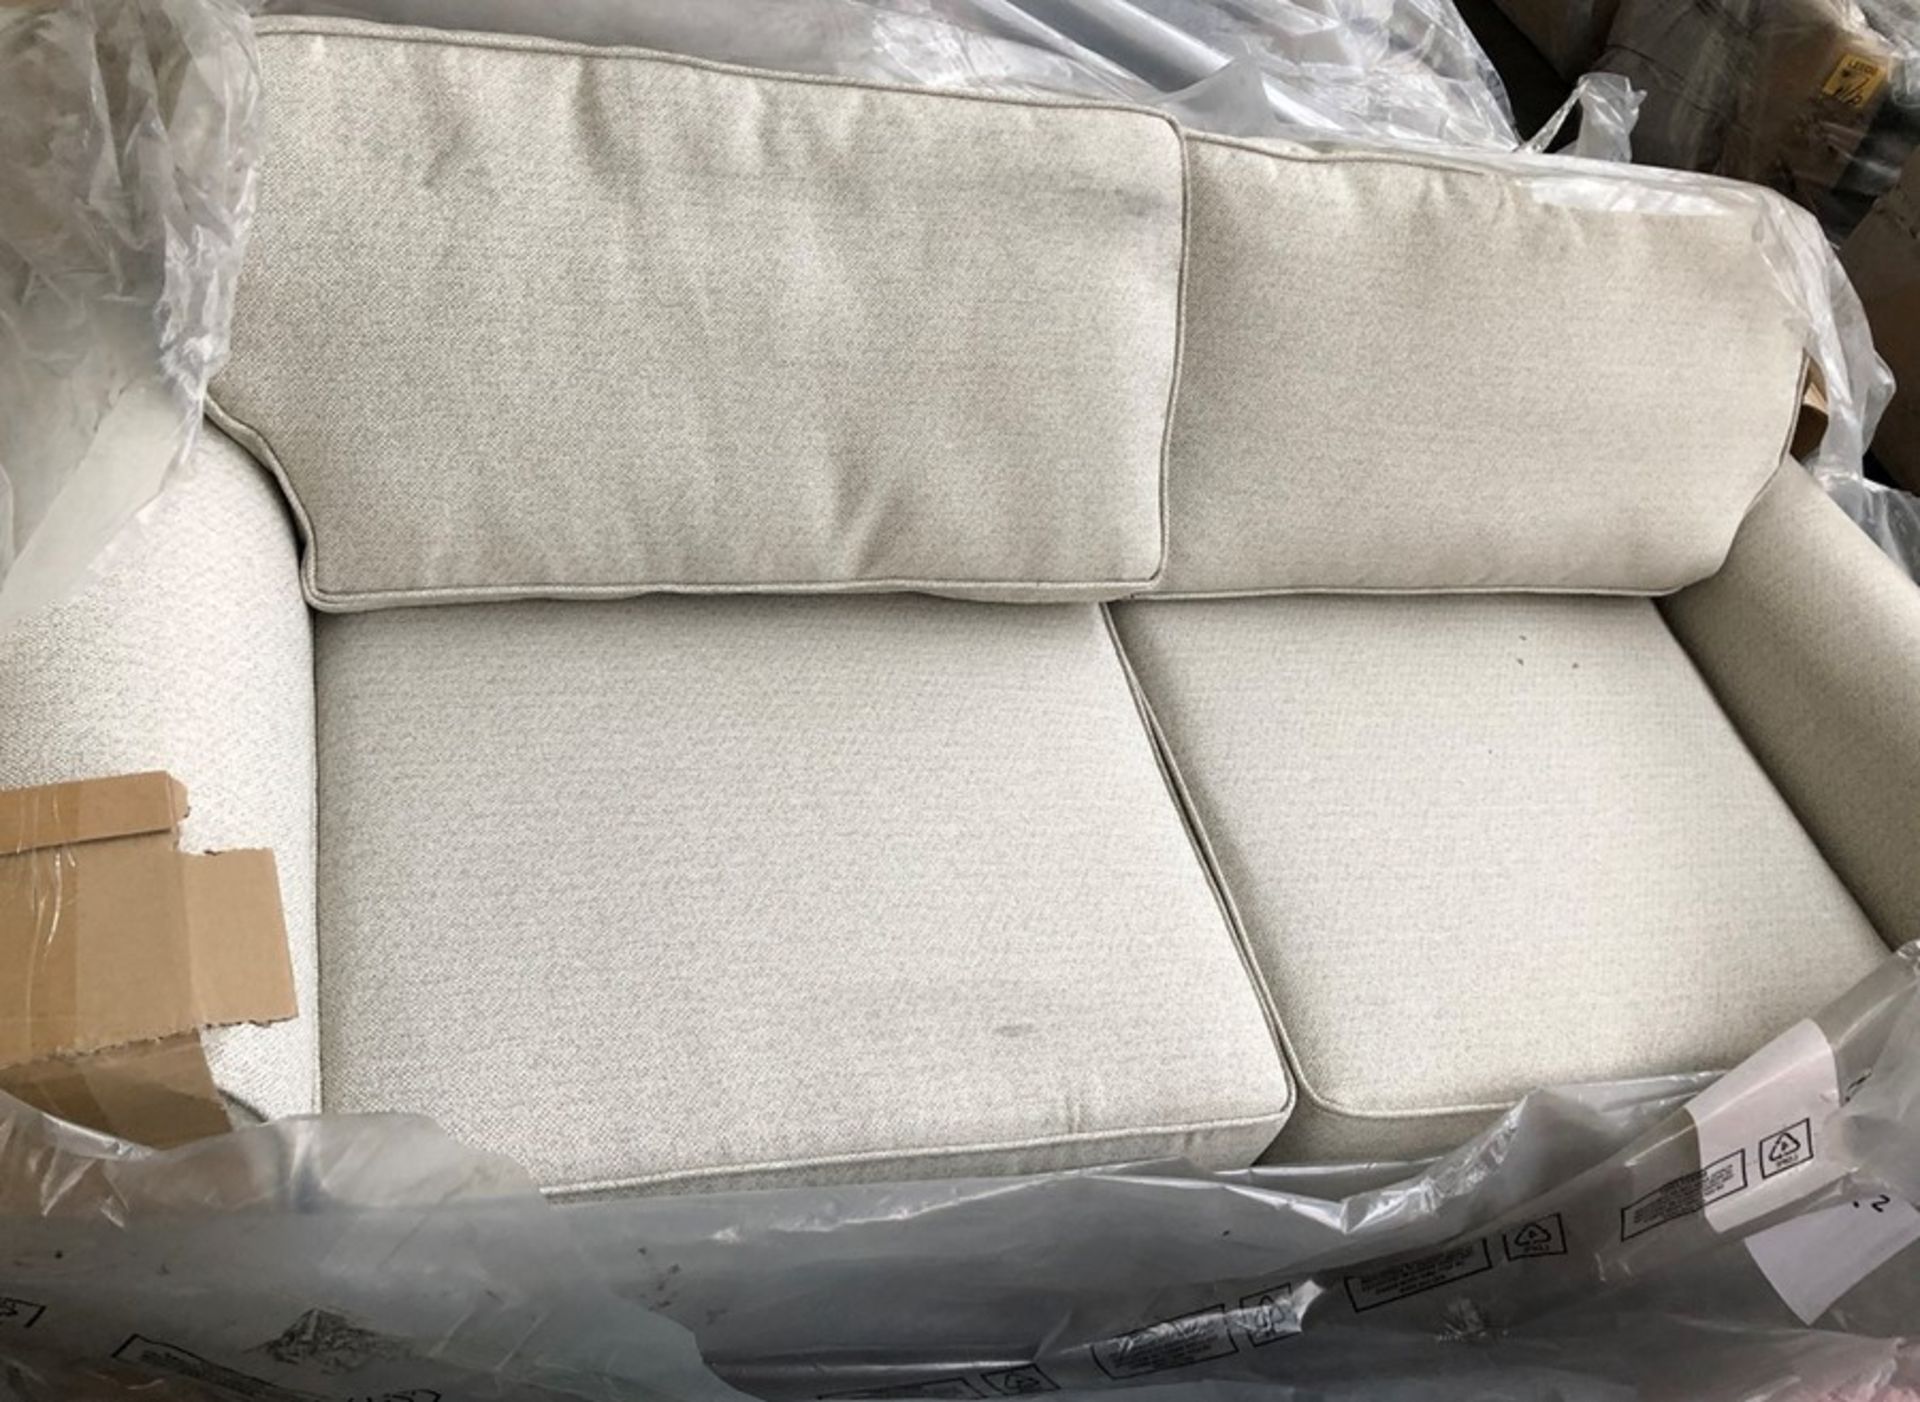 1 BRAND NEW BAGGED FABB SOFAS EDIT 3 SEATER SOFA IN AREZZO CREAM (VIEWING HIGHLY RECOMMENDED)